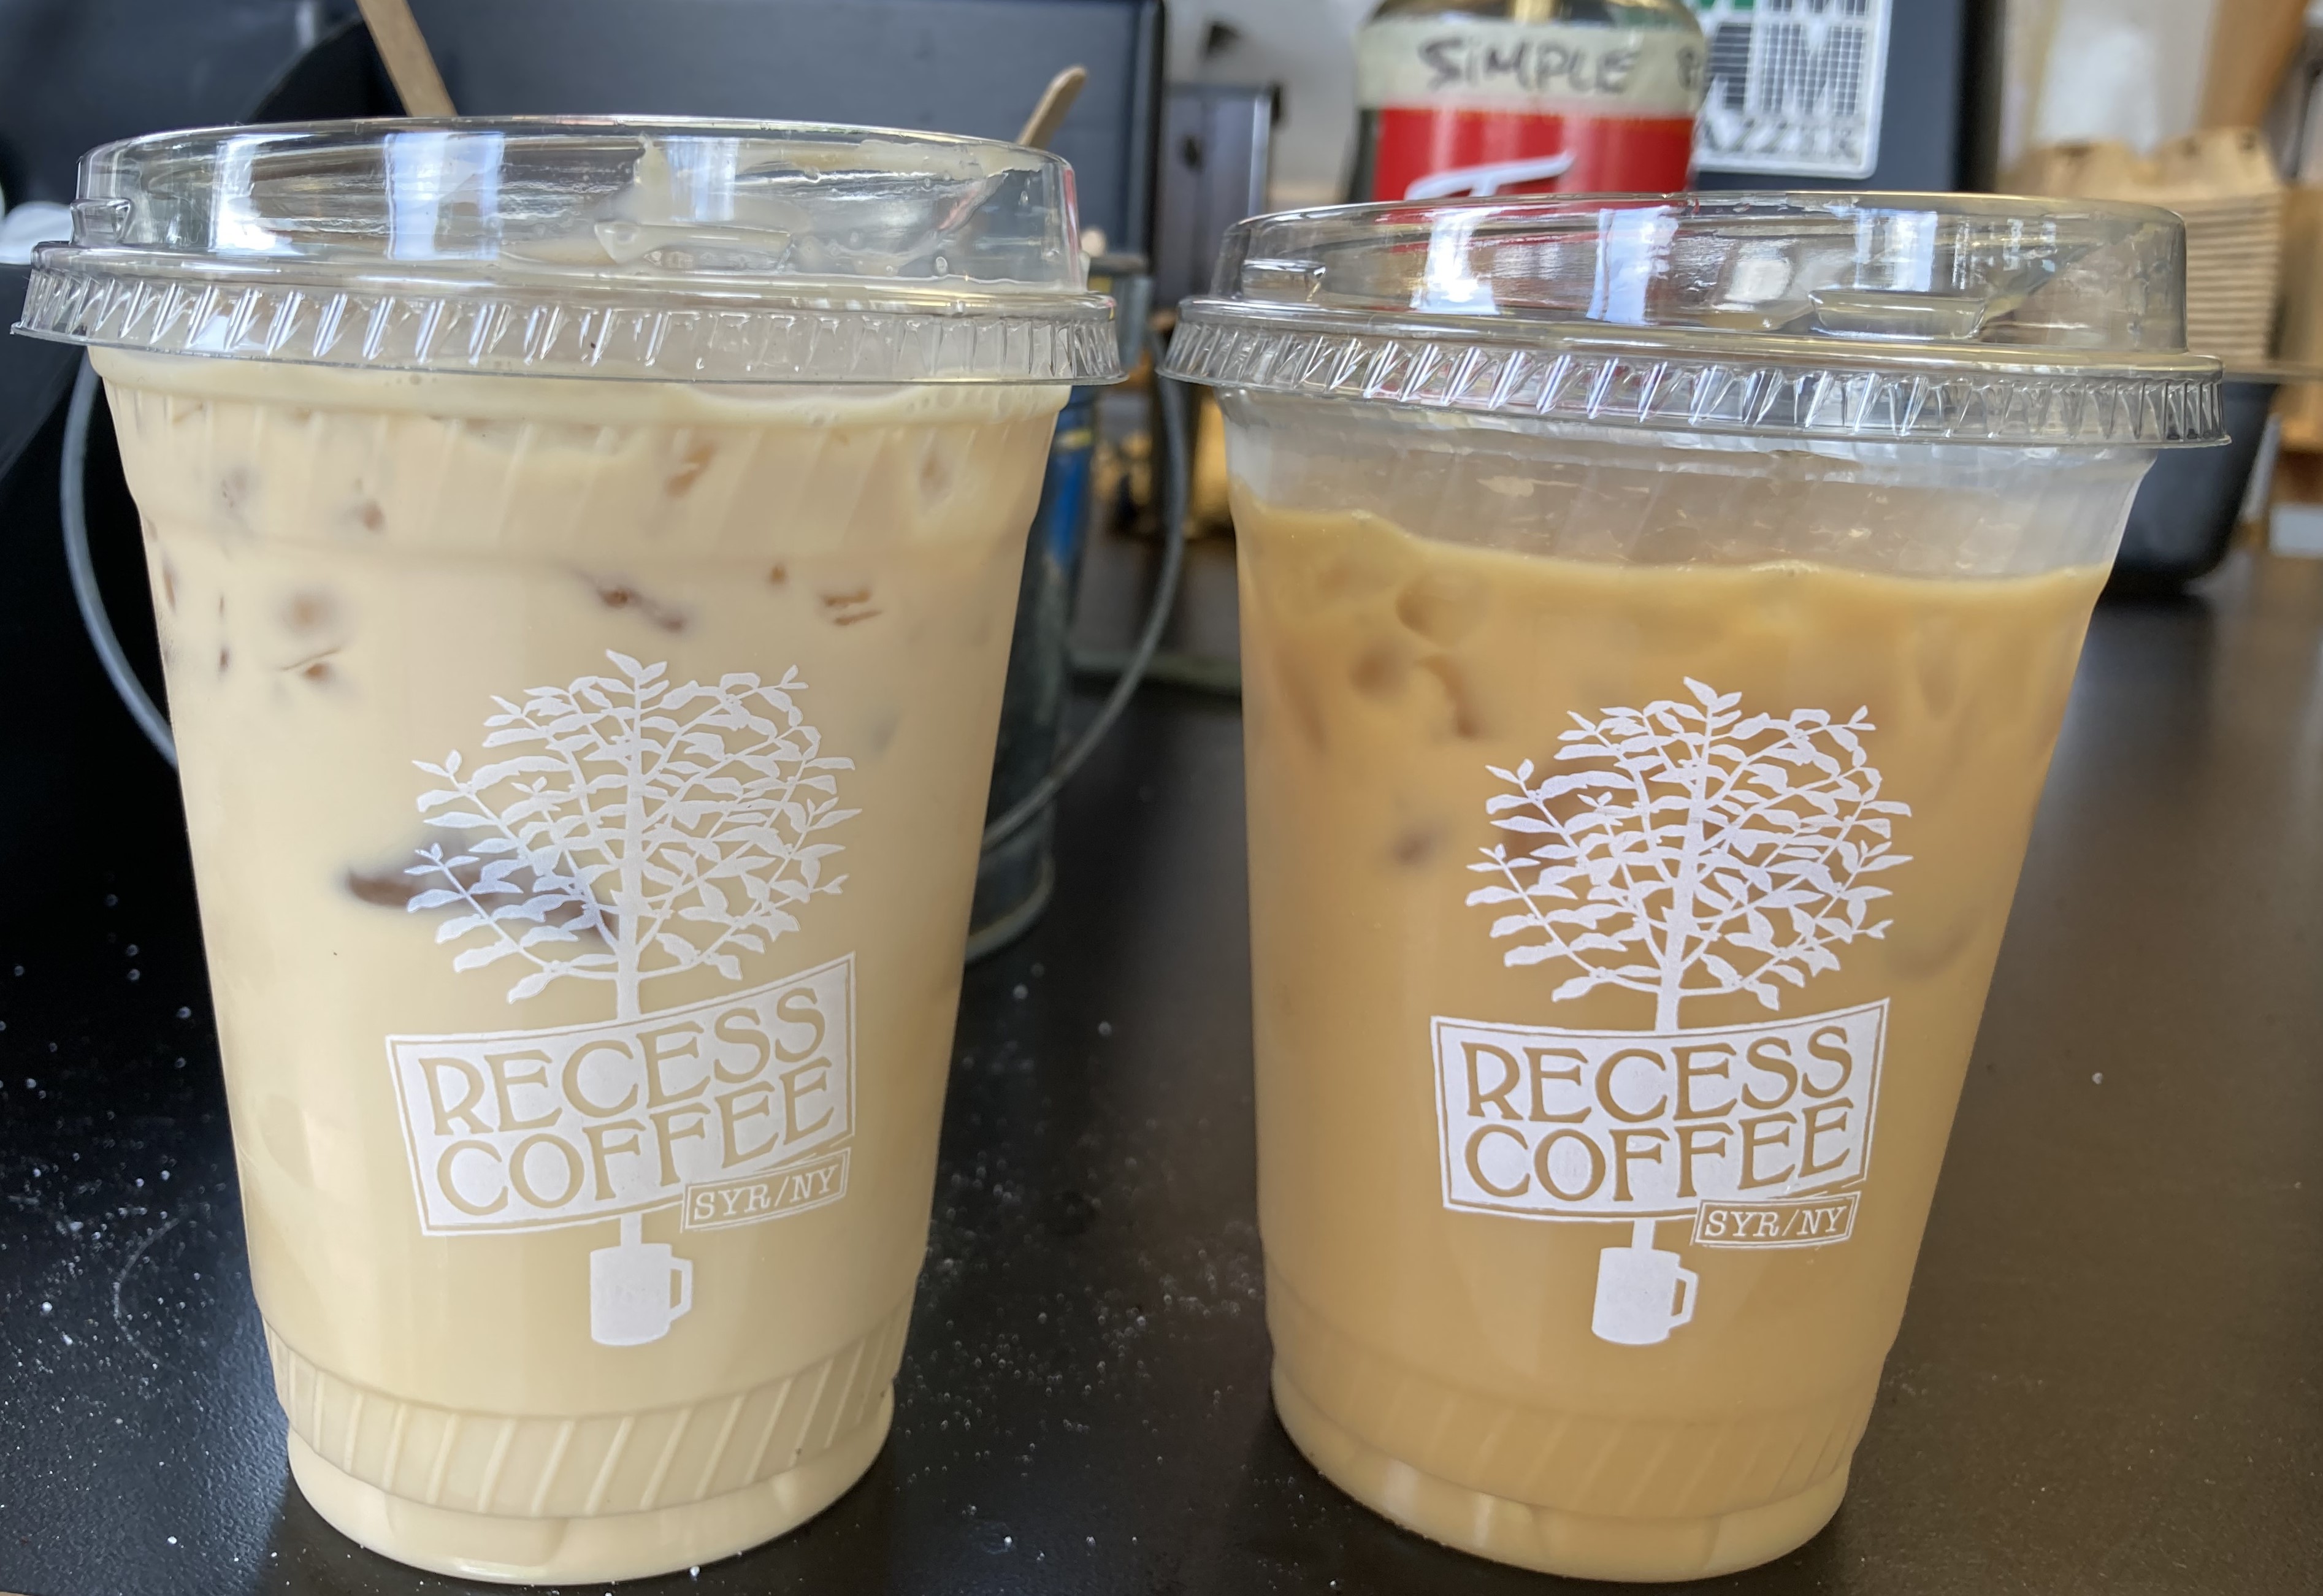 An iced caramel latte and an iced coffee from Recess Coffee.